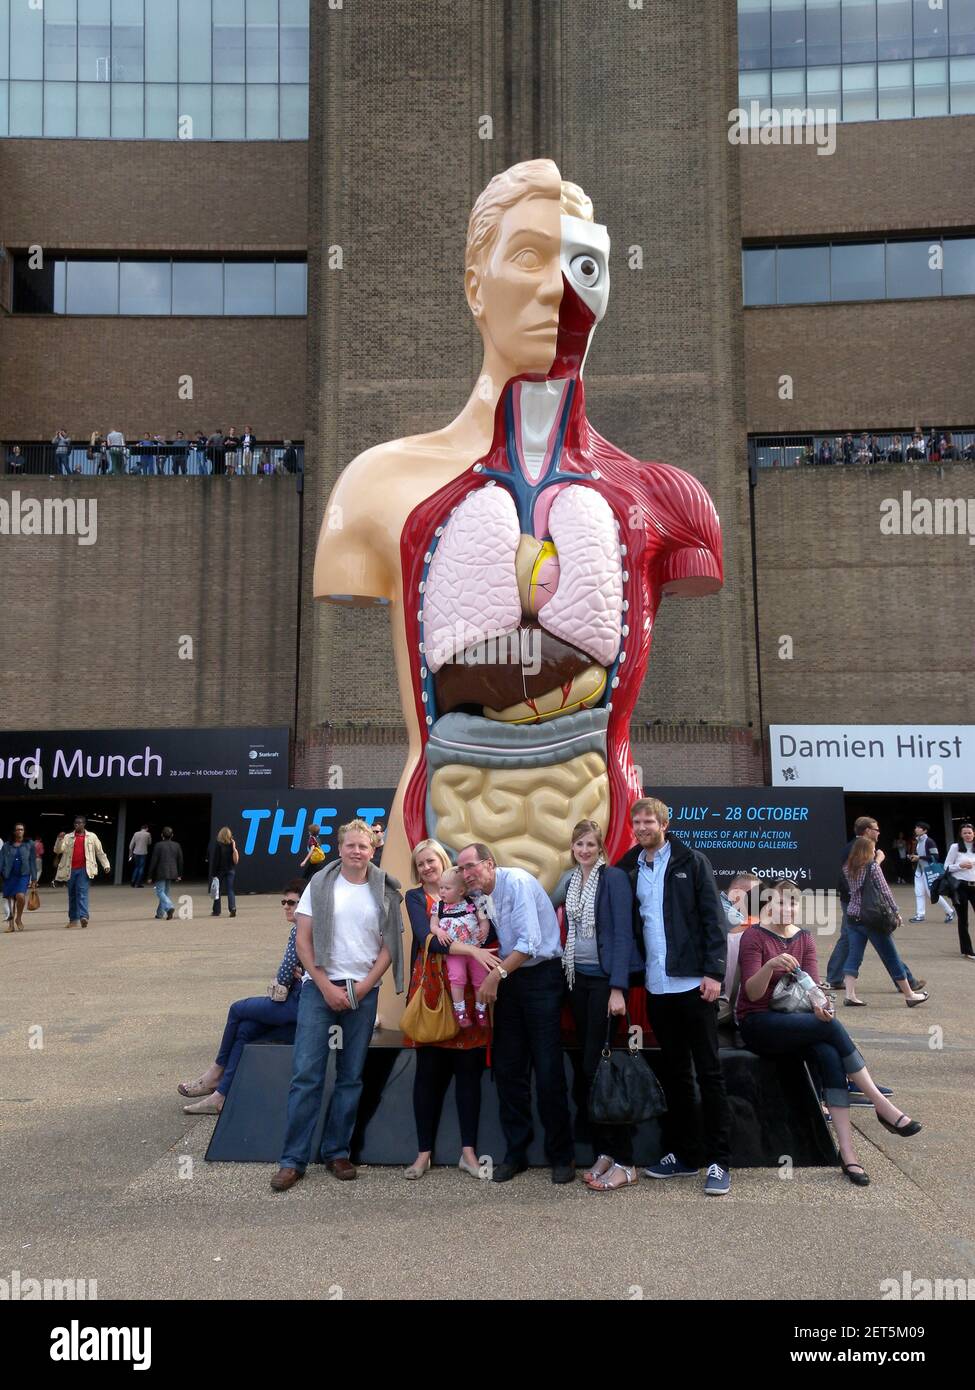 Family posing for a photograp at the statue by Damian Hirst at Tate Modern in London Stock Photo